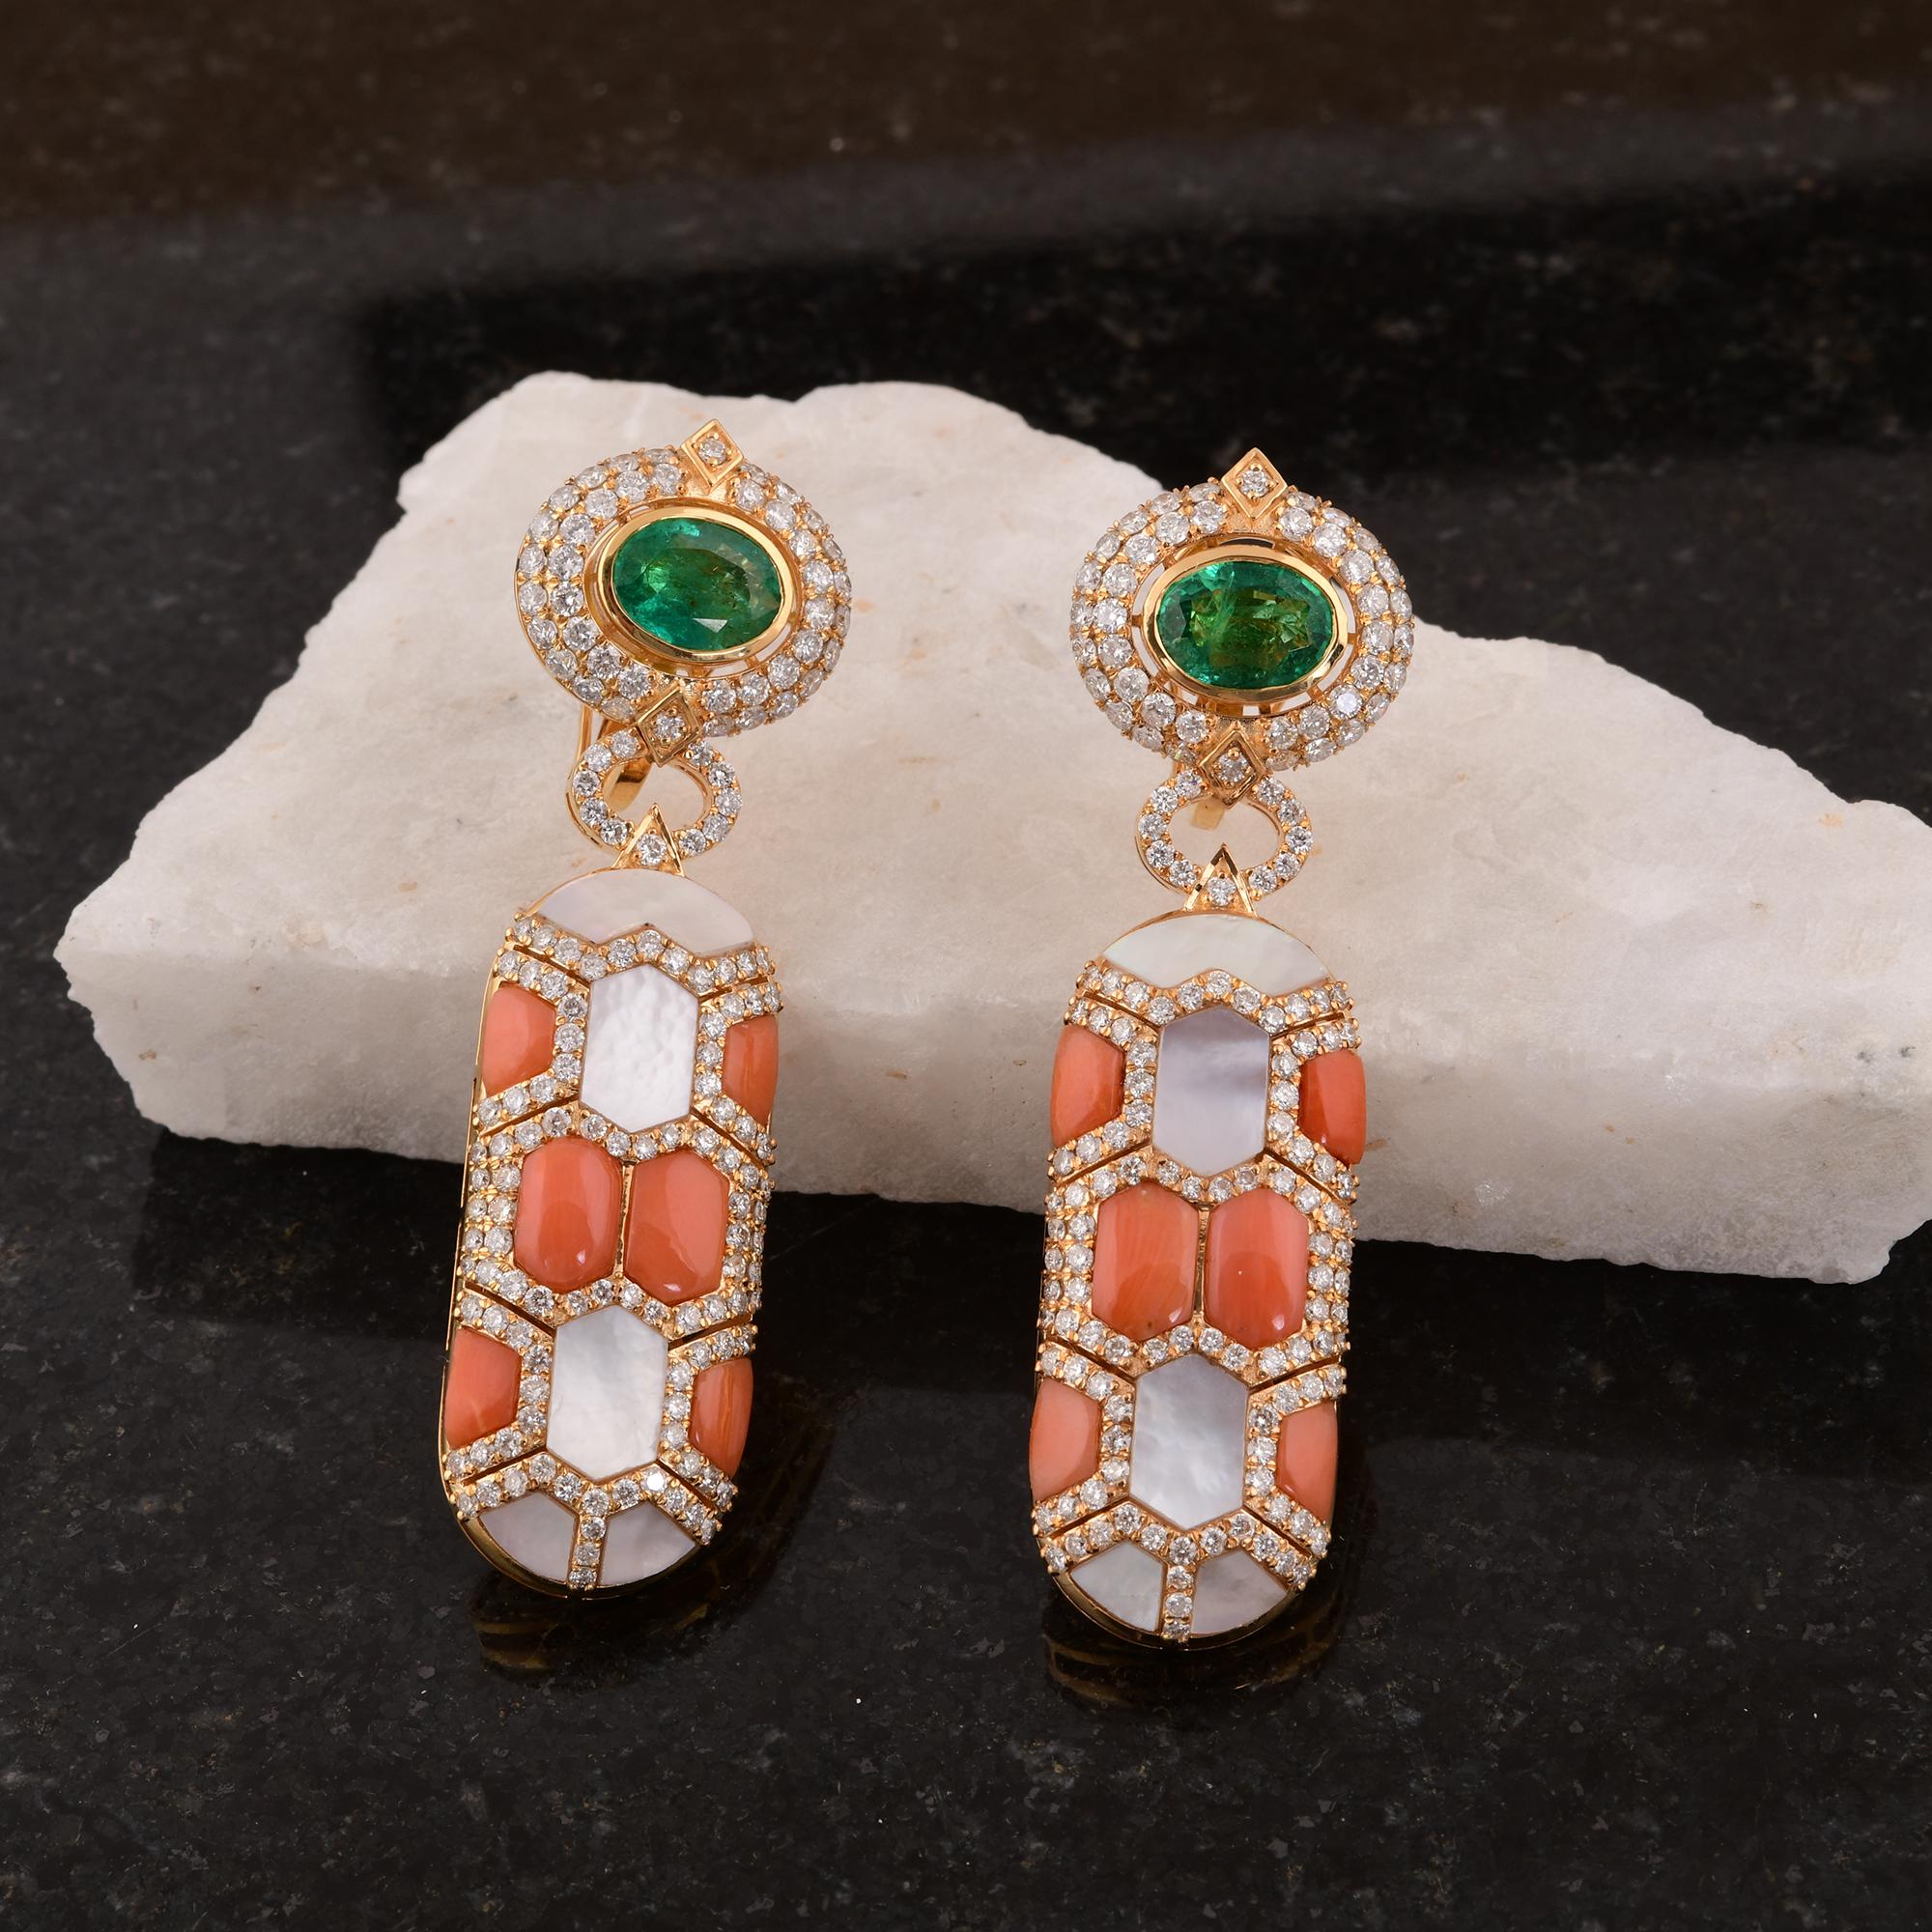 Oval Cut Natural Coral Emerald MOP Gemstone Earrings Diamond 18 Karat Yellow Gold Jewelry For Sale